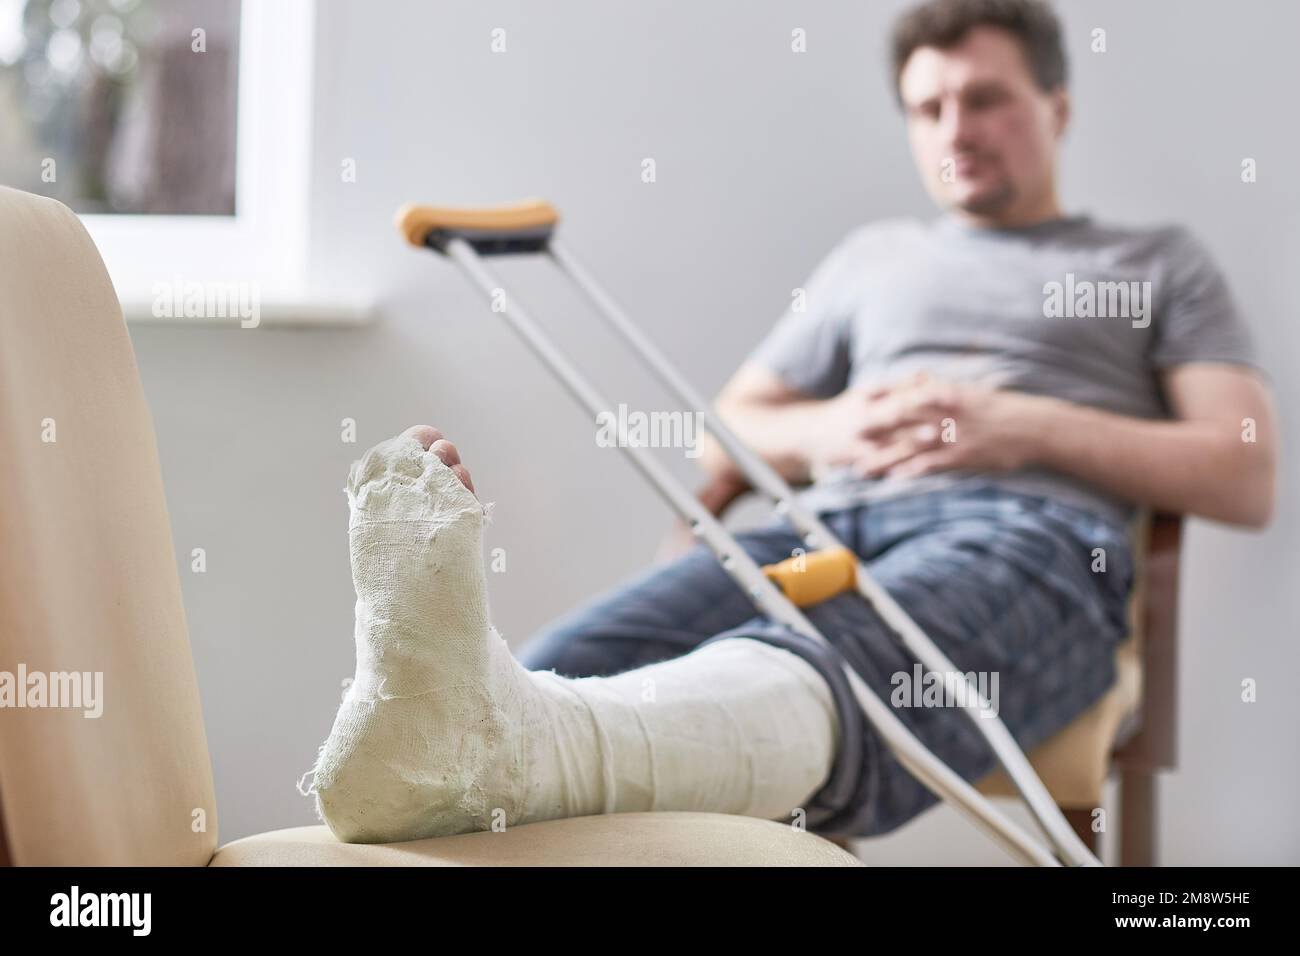 Close up of a young man's Plaster leg cast and after a running injury or fall Stock Photo